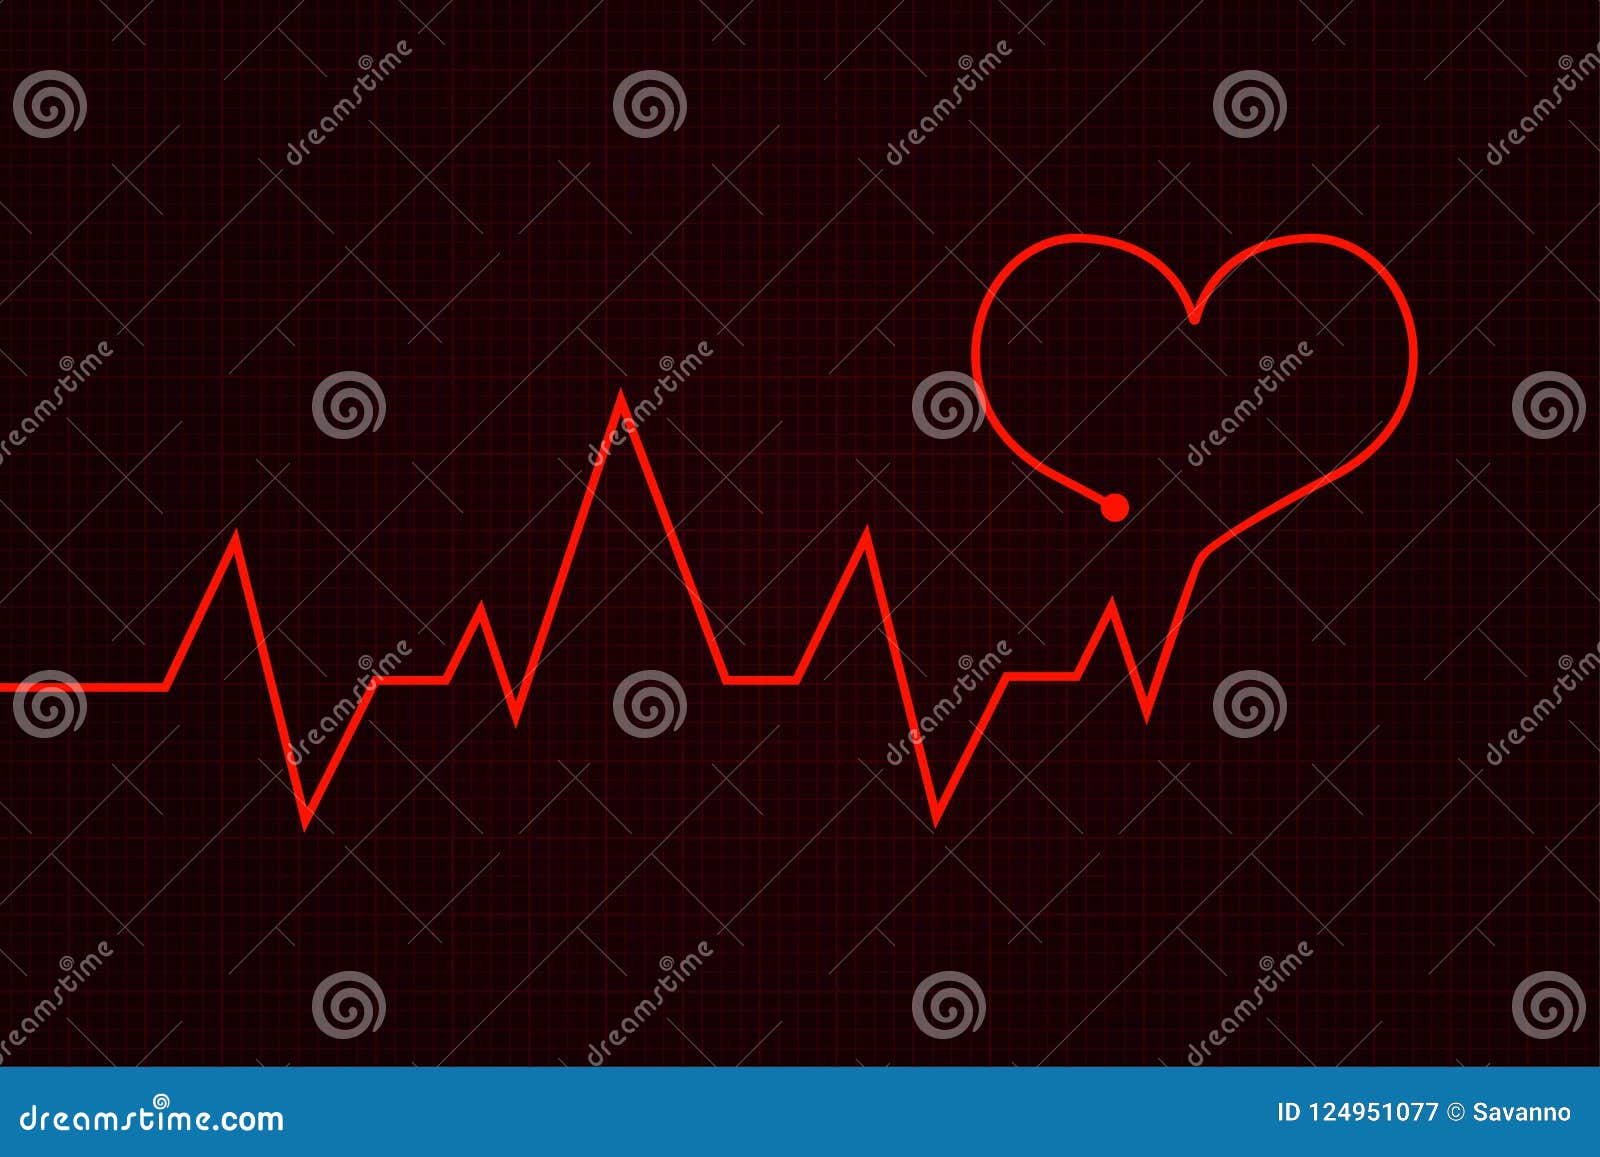 images heart cardiograph